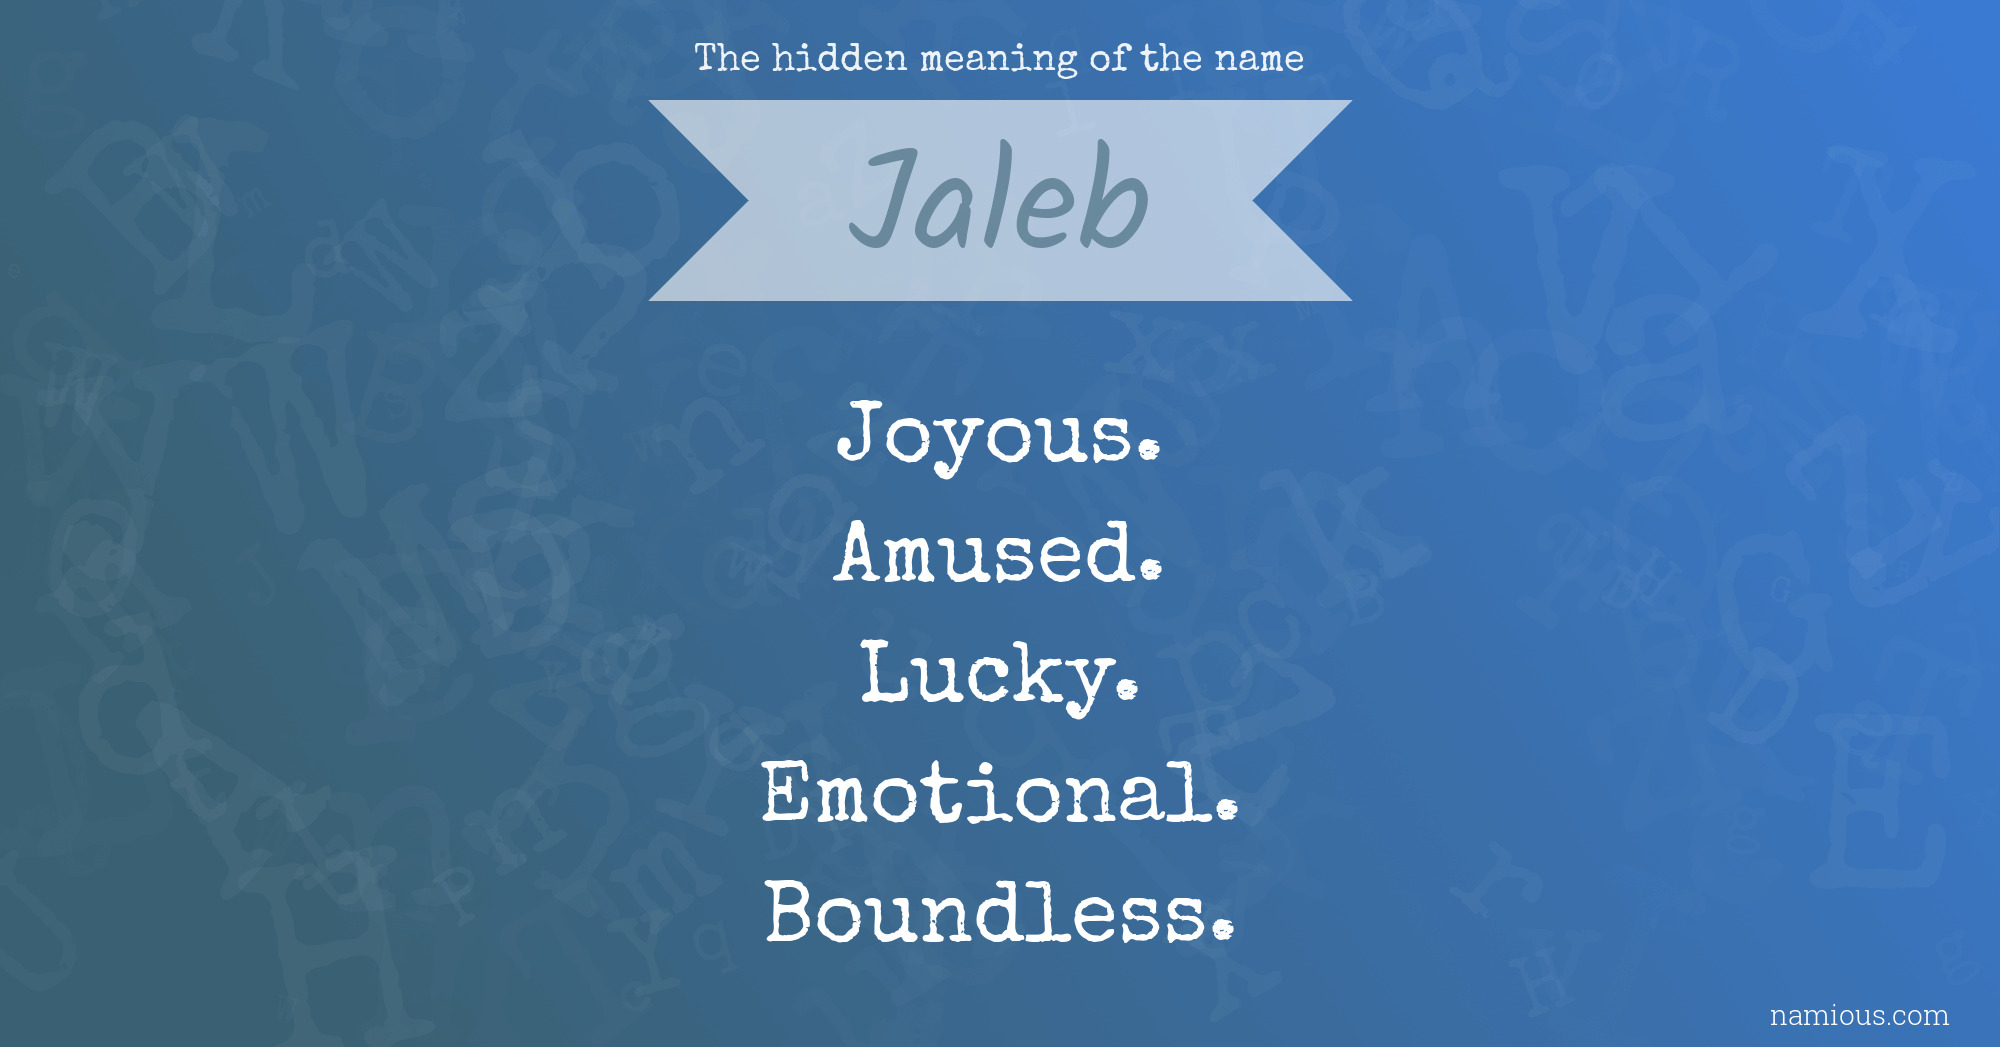 The hidden meaning of the name Jaleb